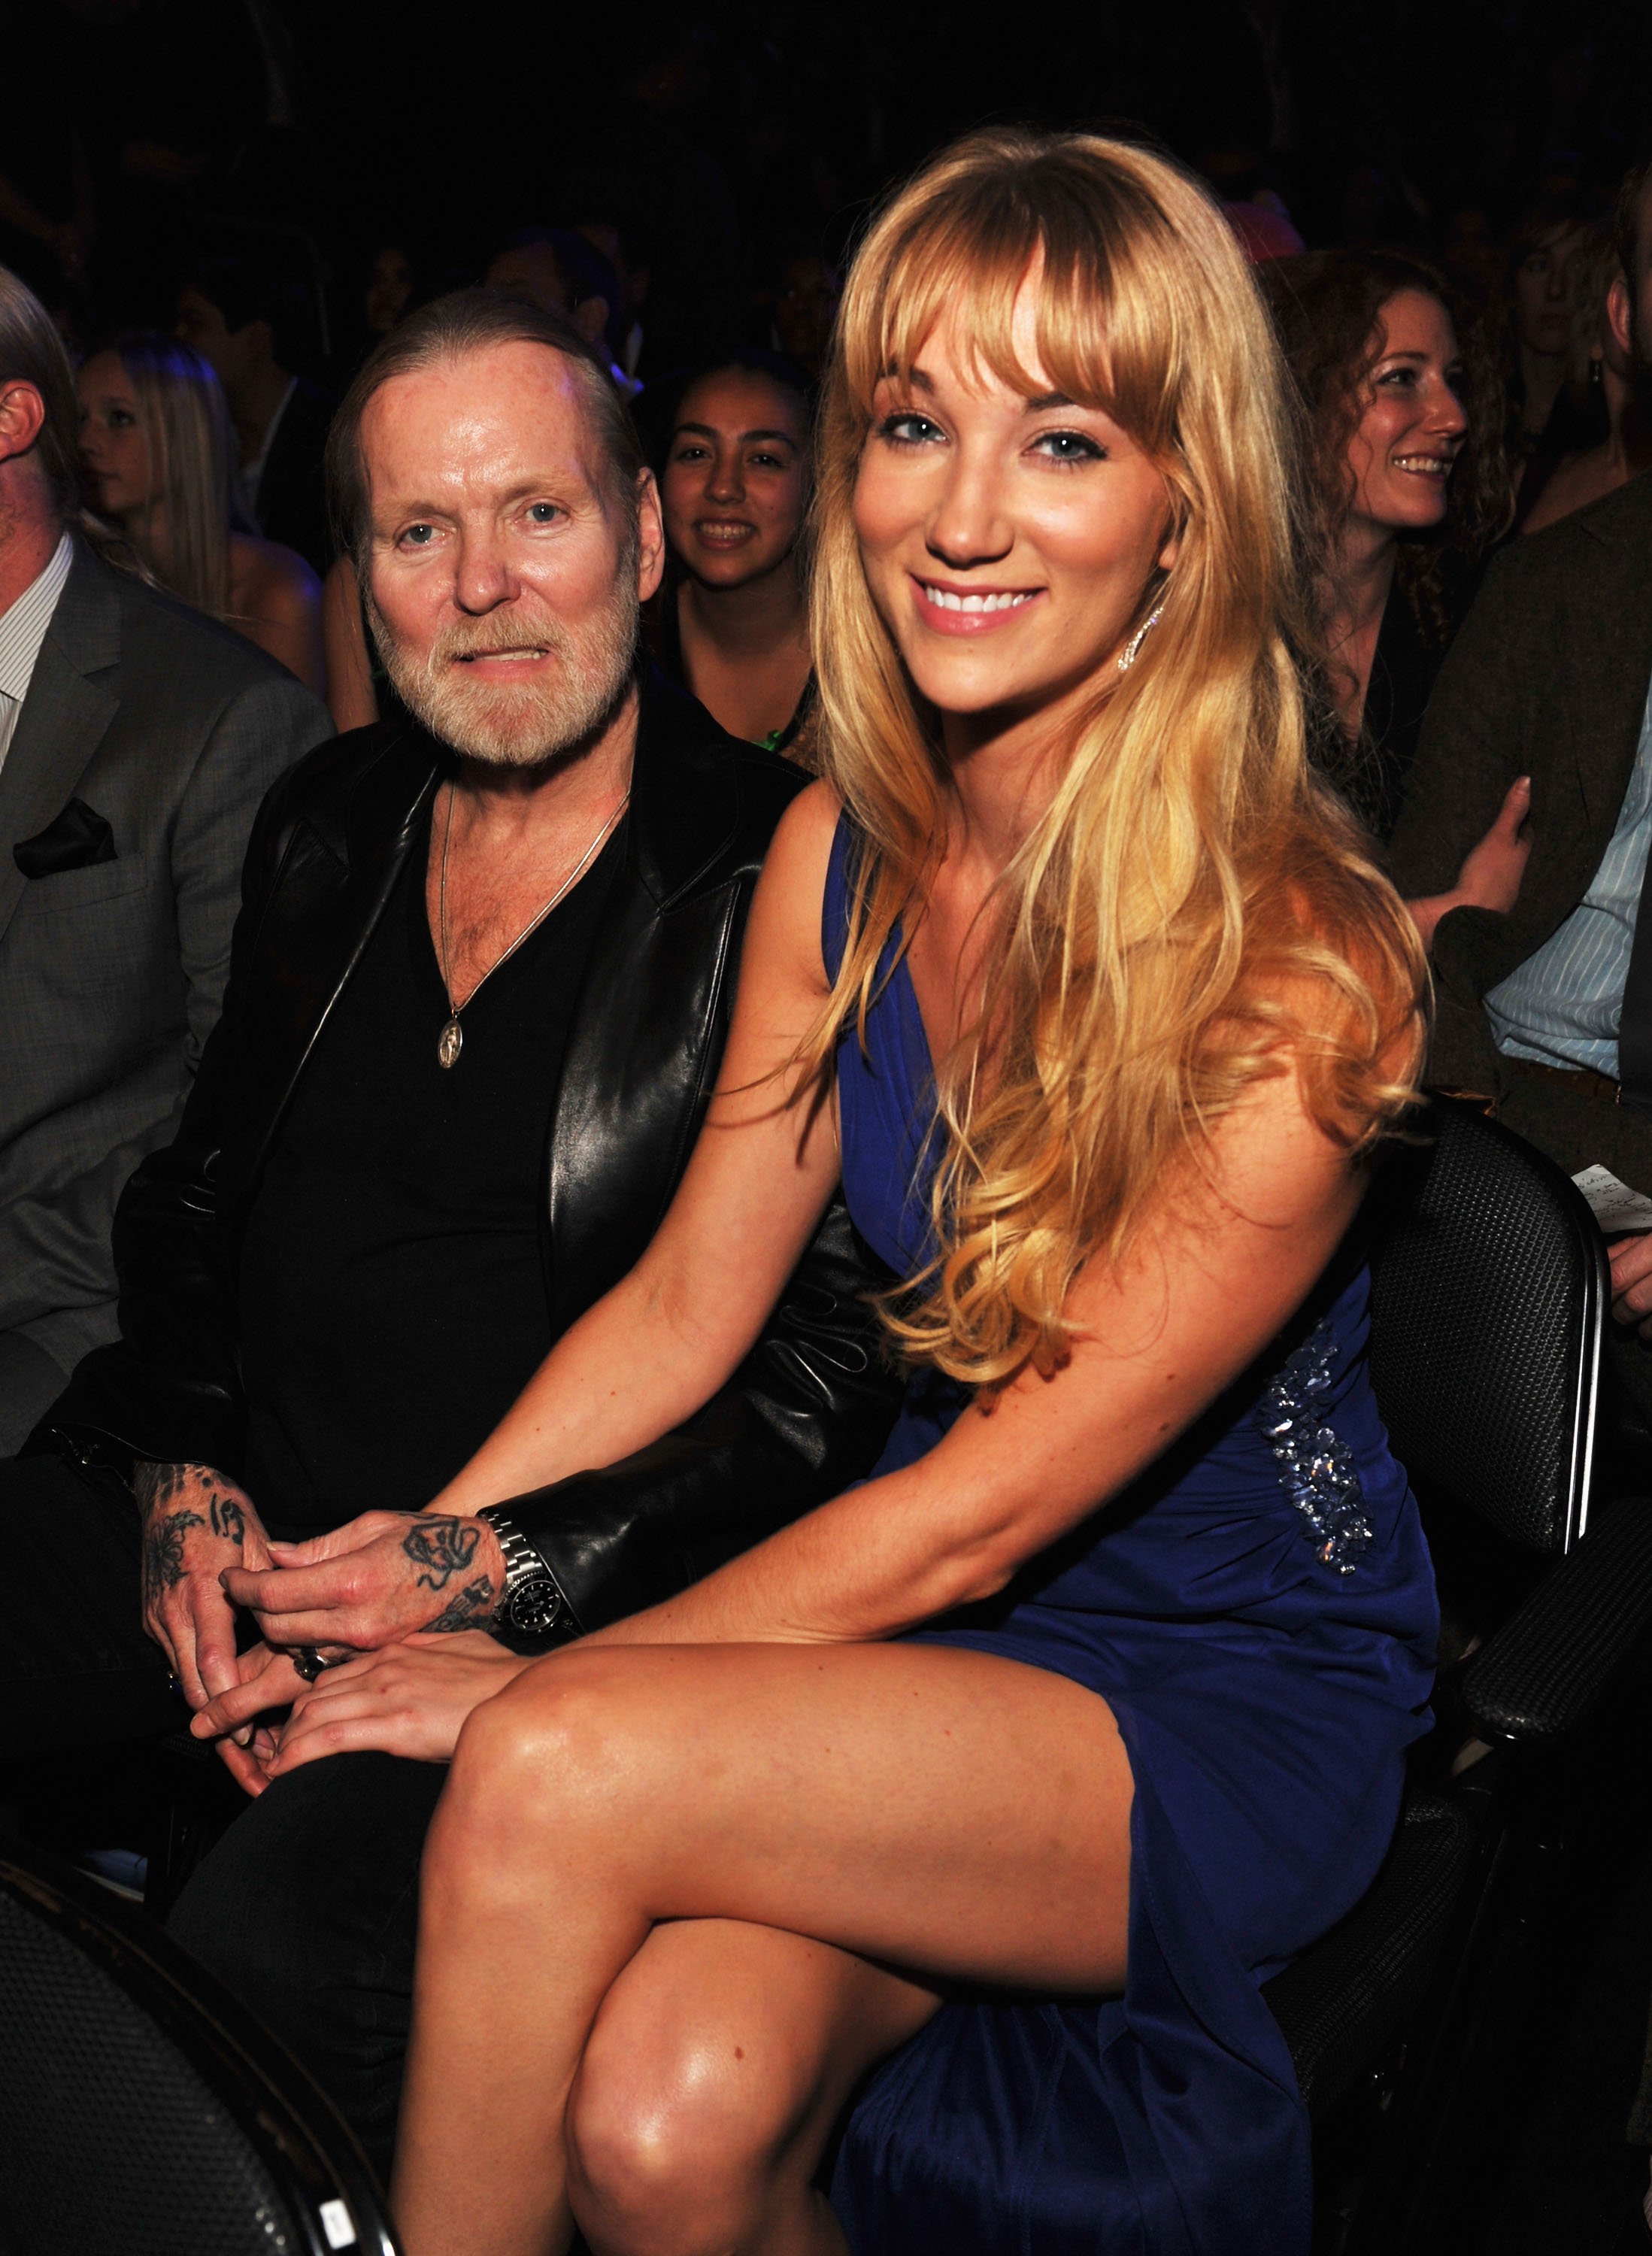 Gregg Allman and Shannon Williams attend The 54th Annual GRAMMY Awards at Staples Center on February 12, 2012, in Los Angeles, California. | Source: Getty Images